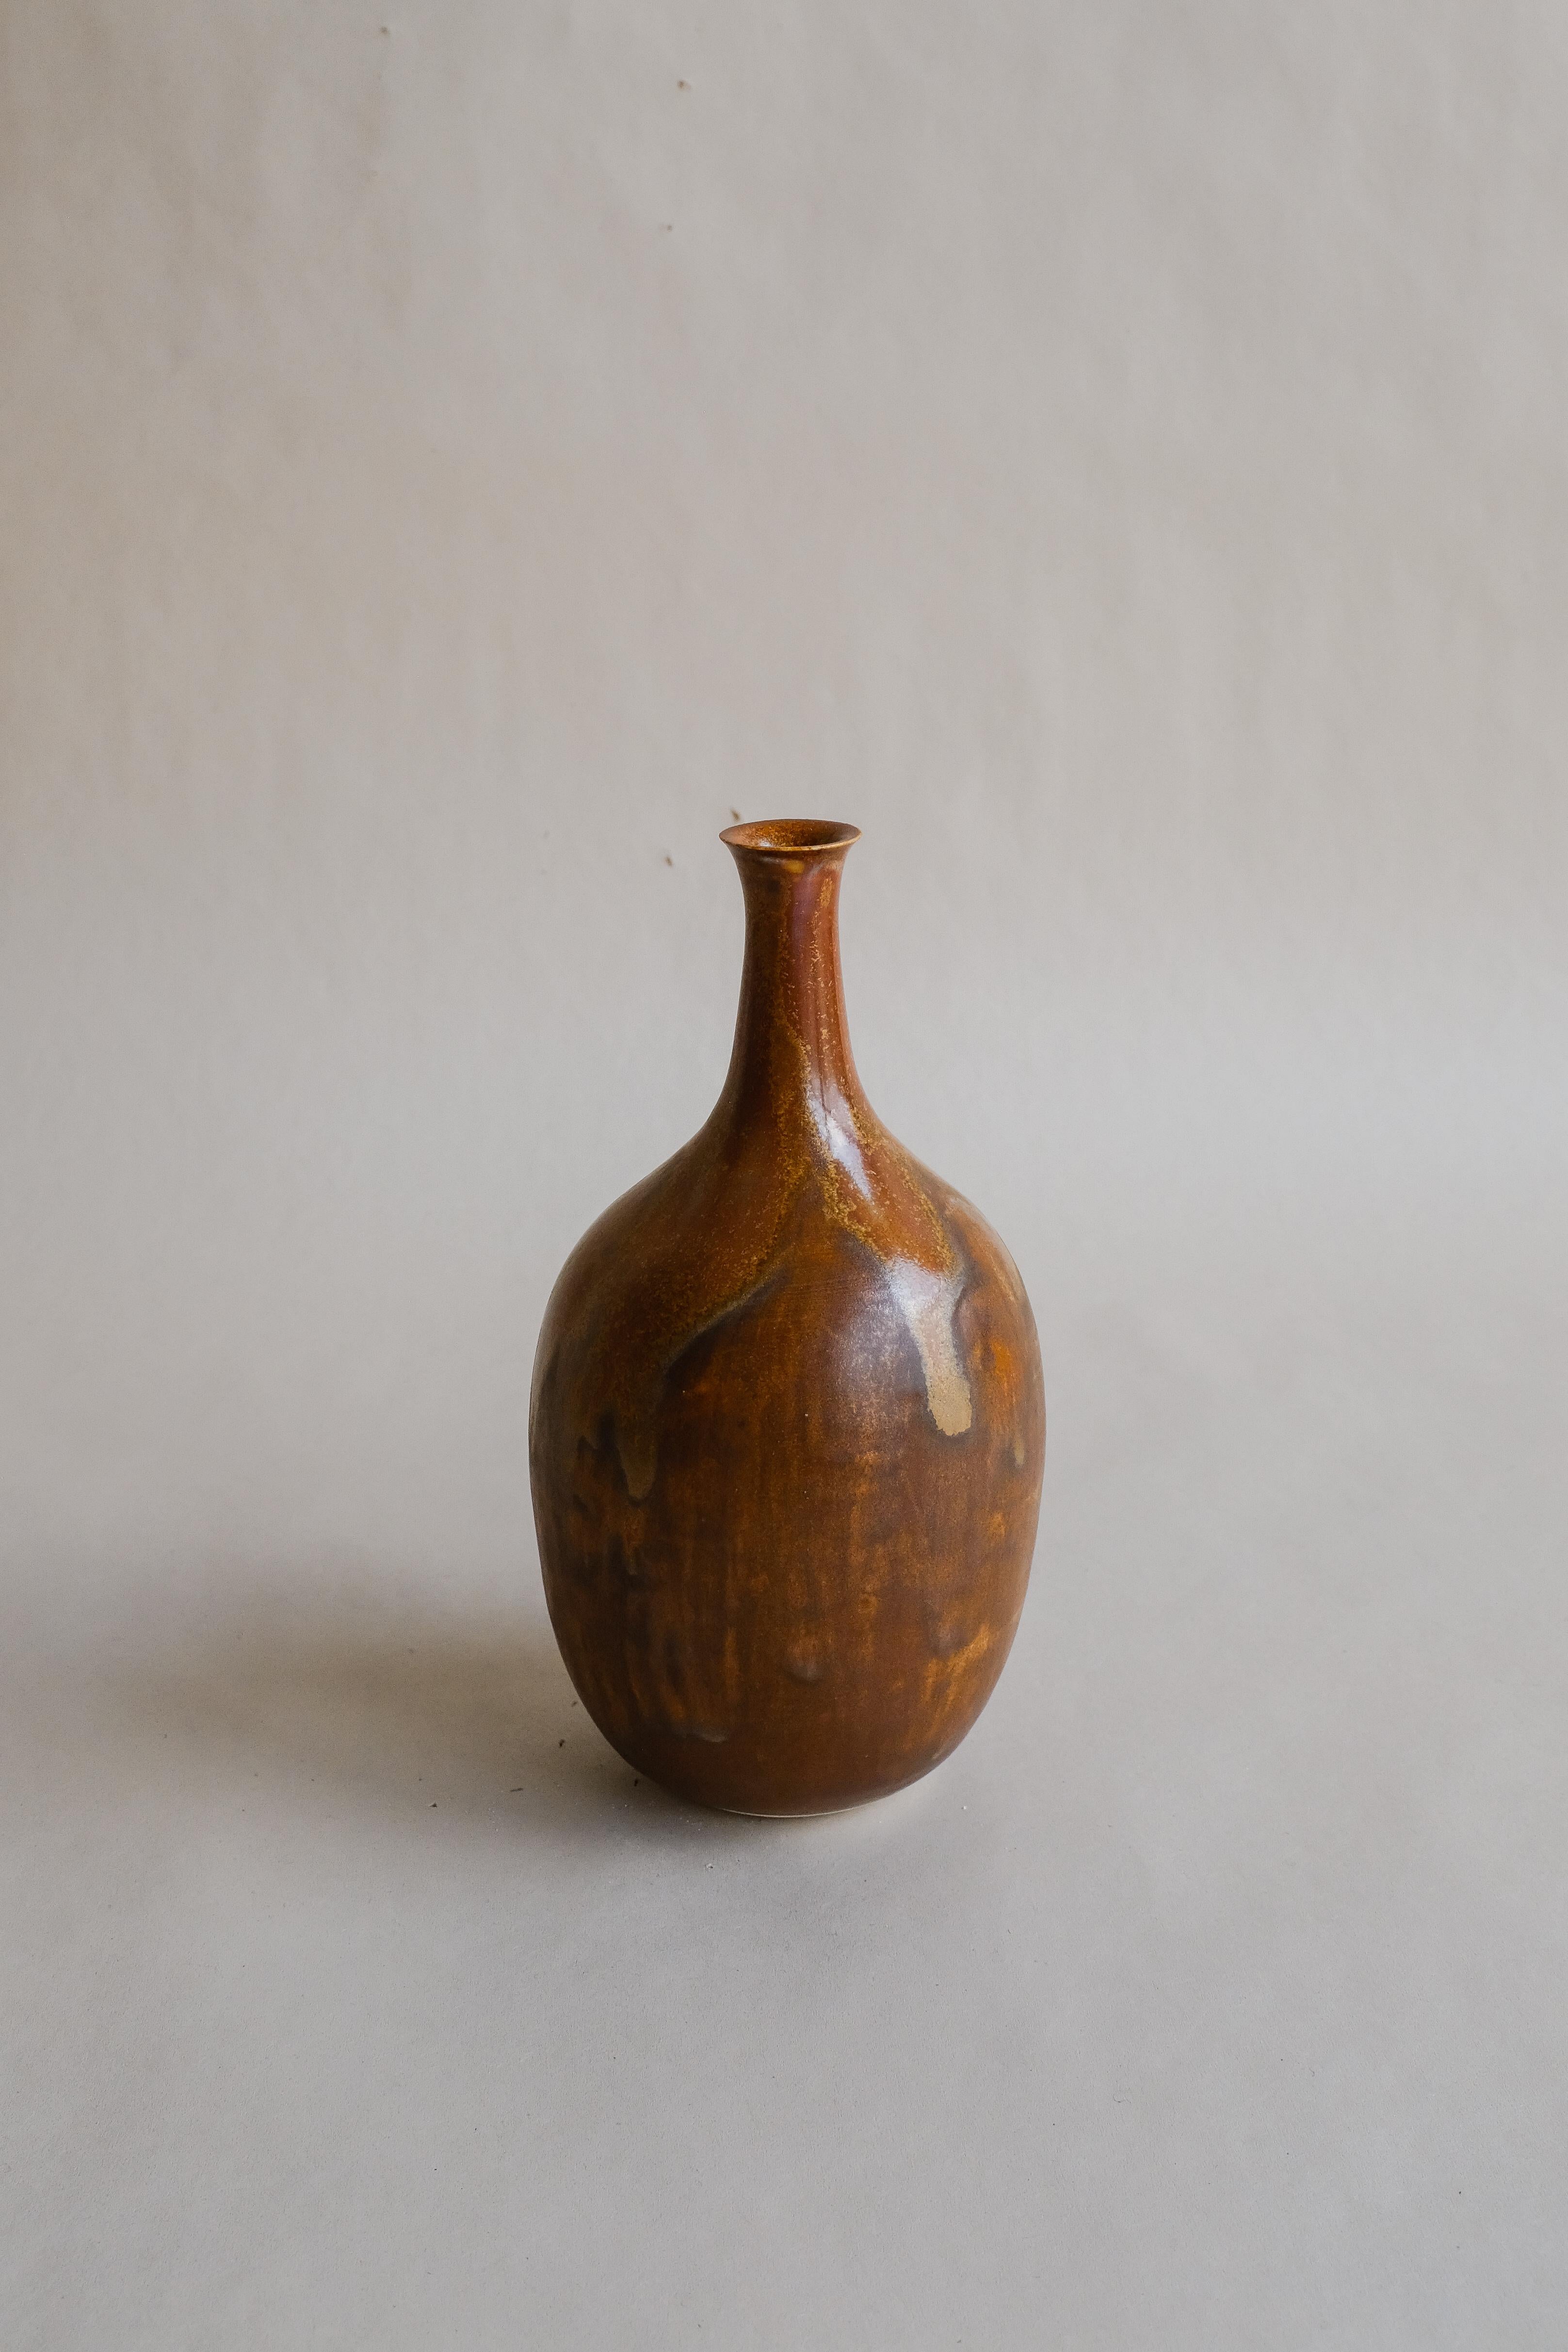 - Hand-thrown porcelain, featuring a proprietary, dimensional glaze fired in a high-fired gas kiln
- Organic rounded silhouette
- Form is inspired by the nhãn (longan) fruit on a stem305
- 1-inch opening
- Designed and made in NYC by Vy Voi
- Vy Voi